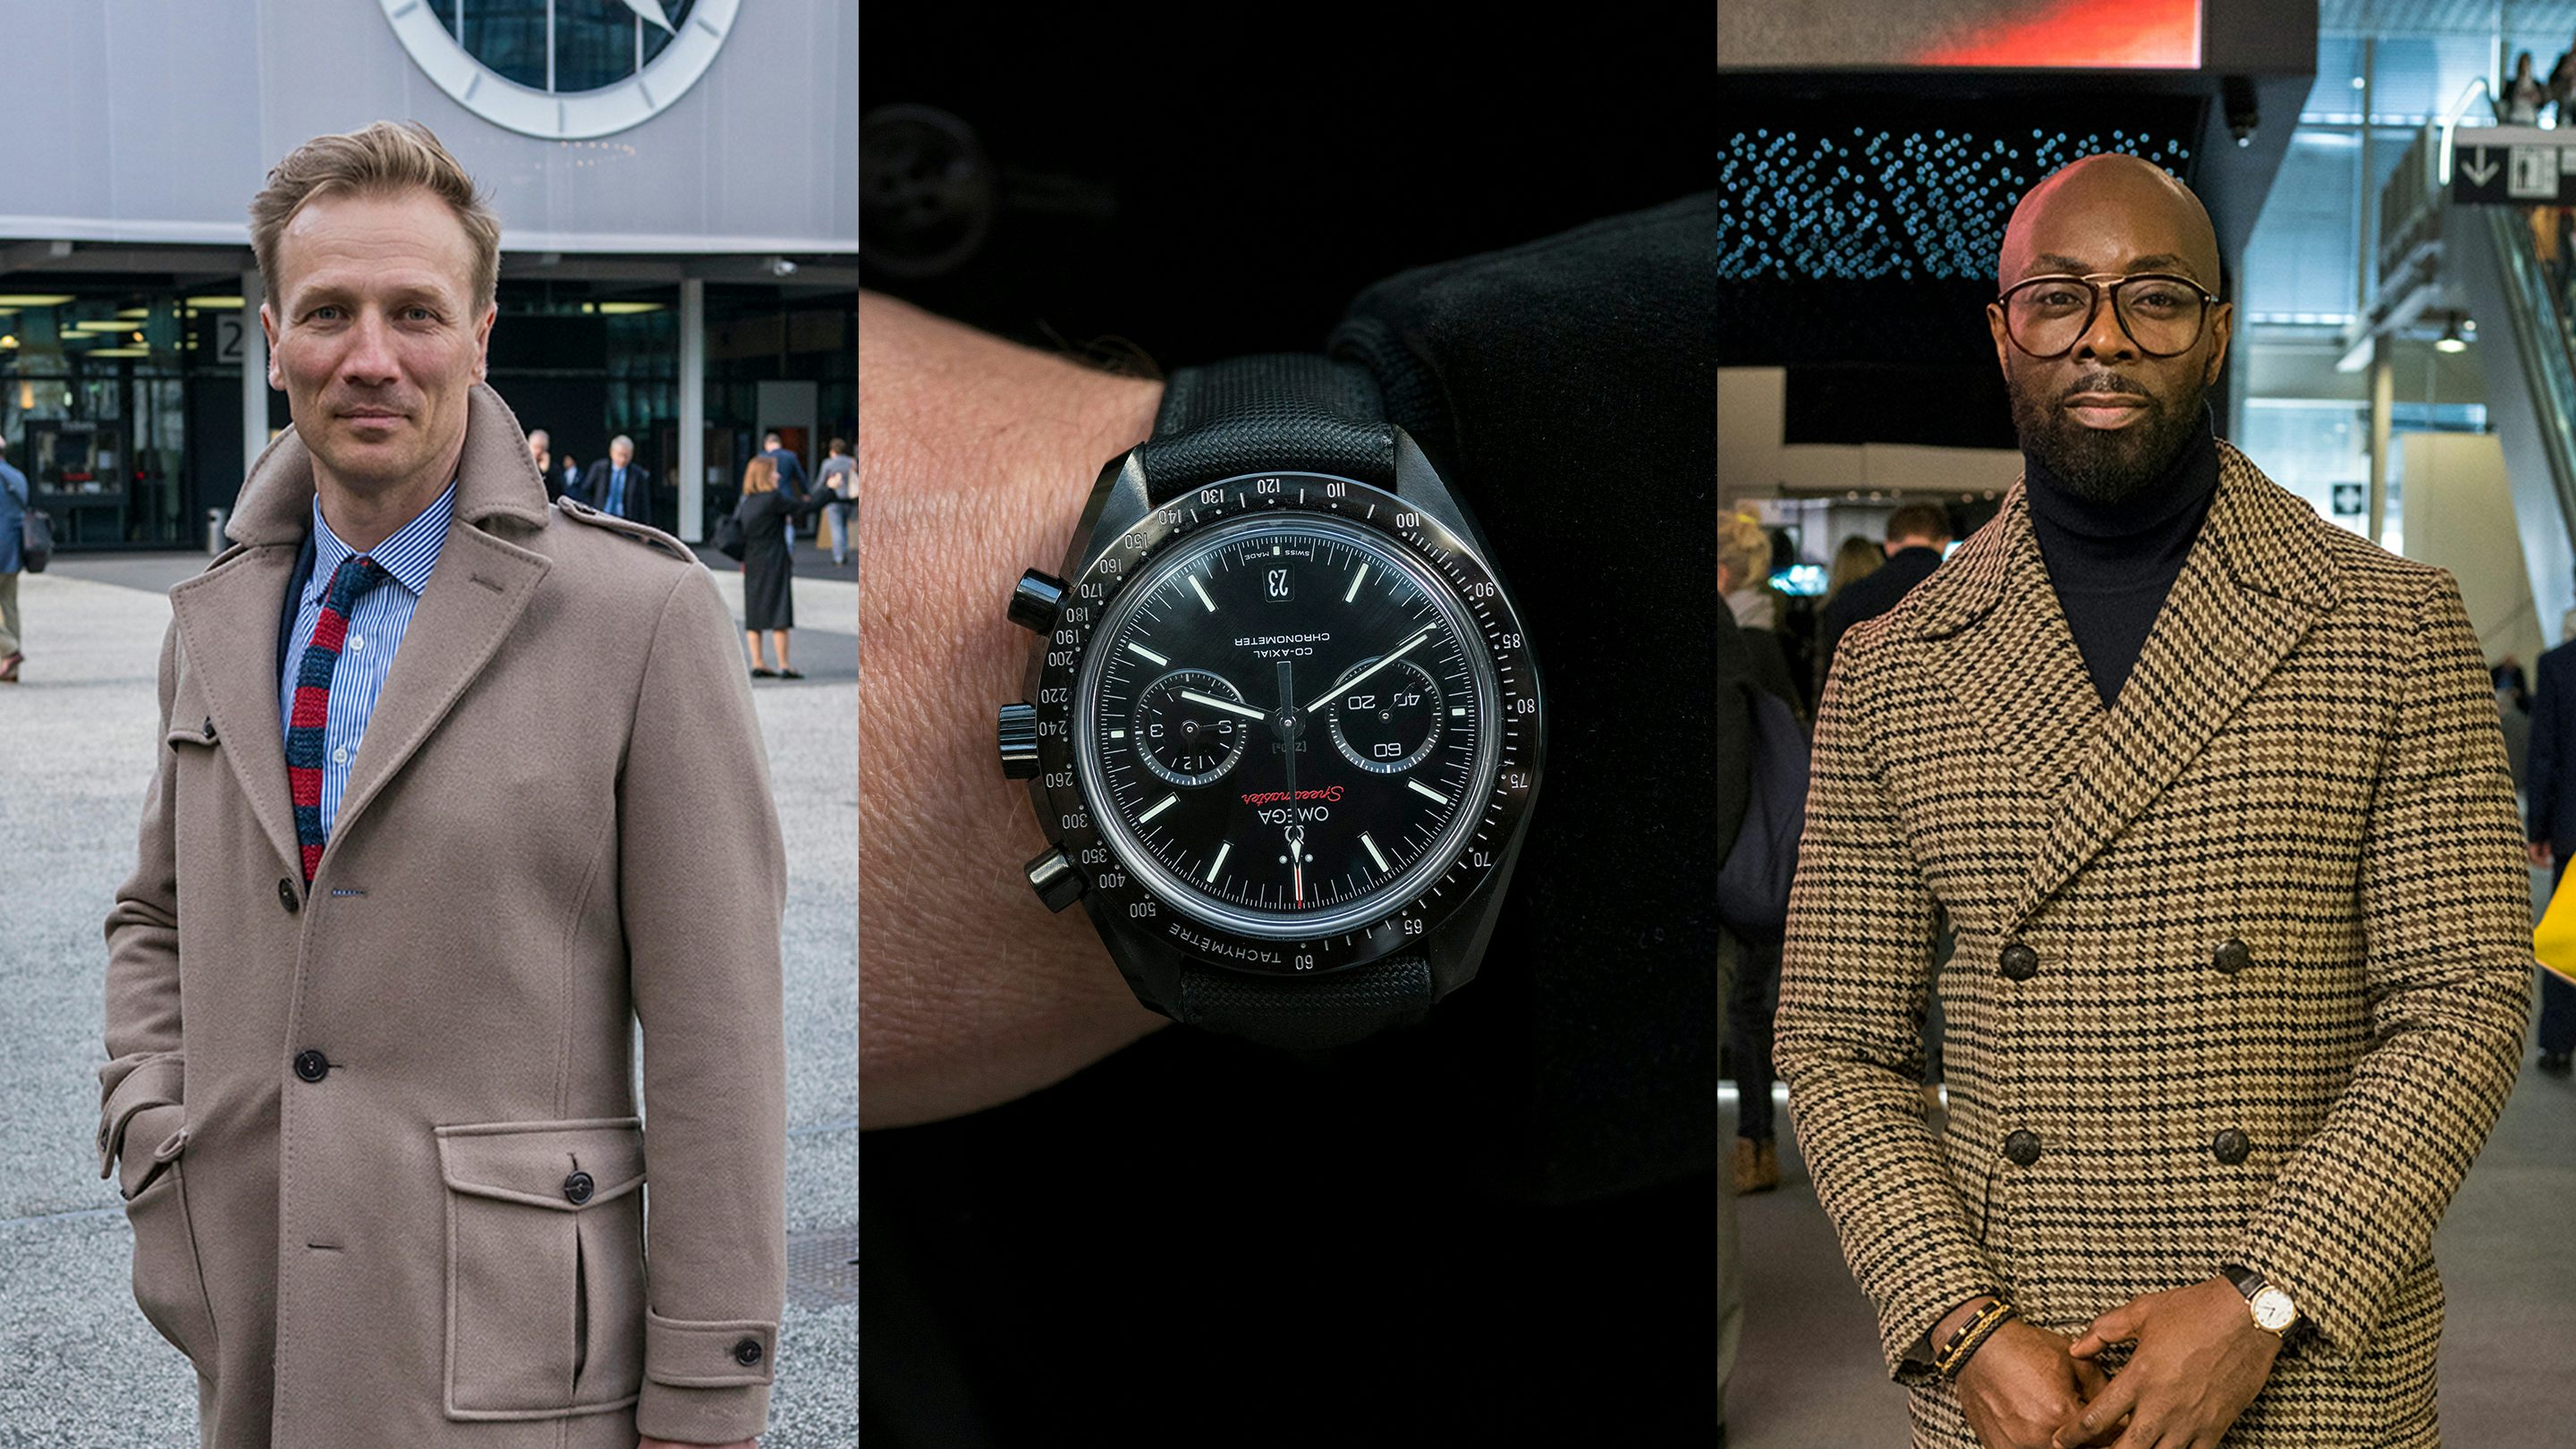 Photo Report: The Fashion And Watches Of Baselworld 2018 - Hodinkee